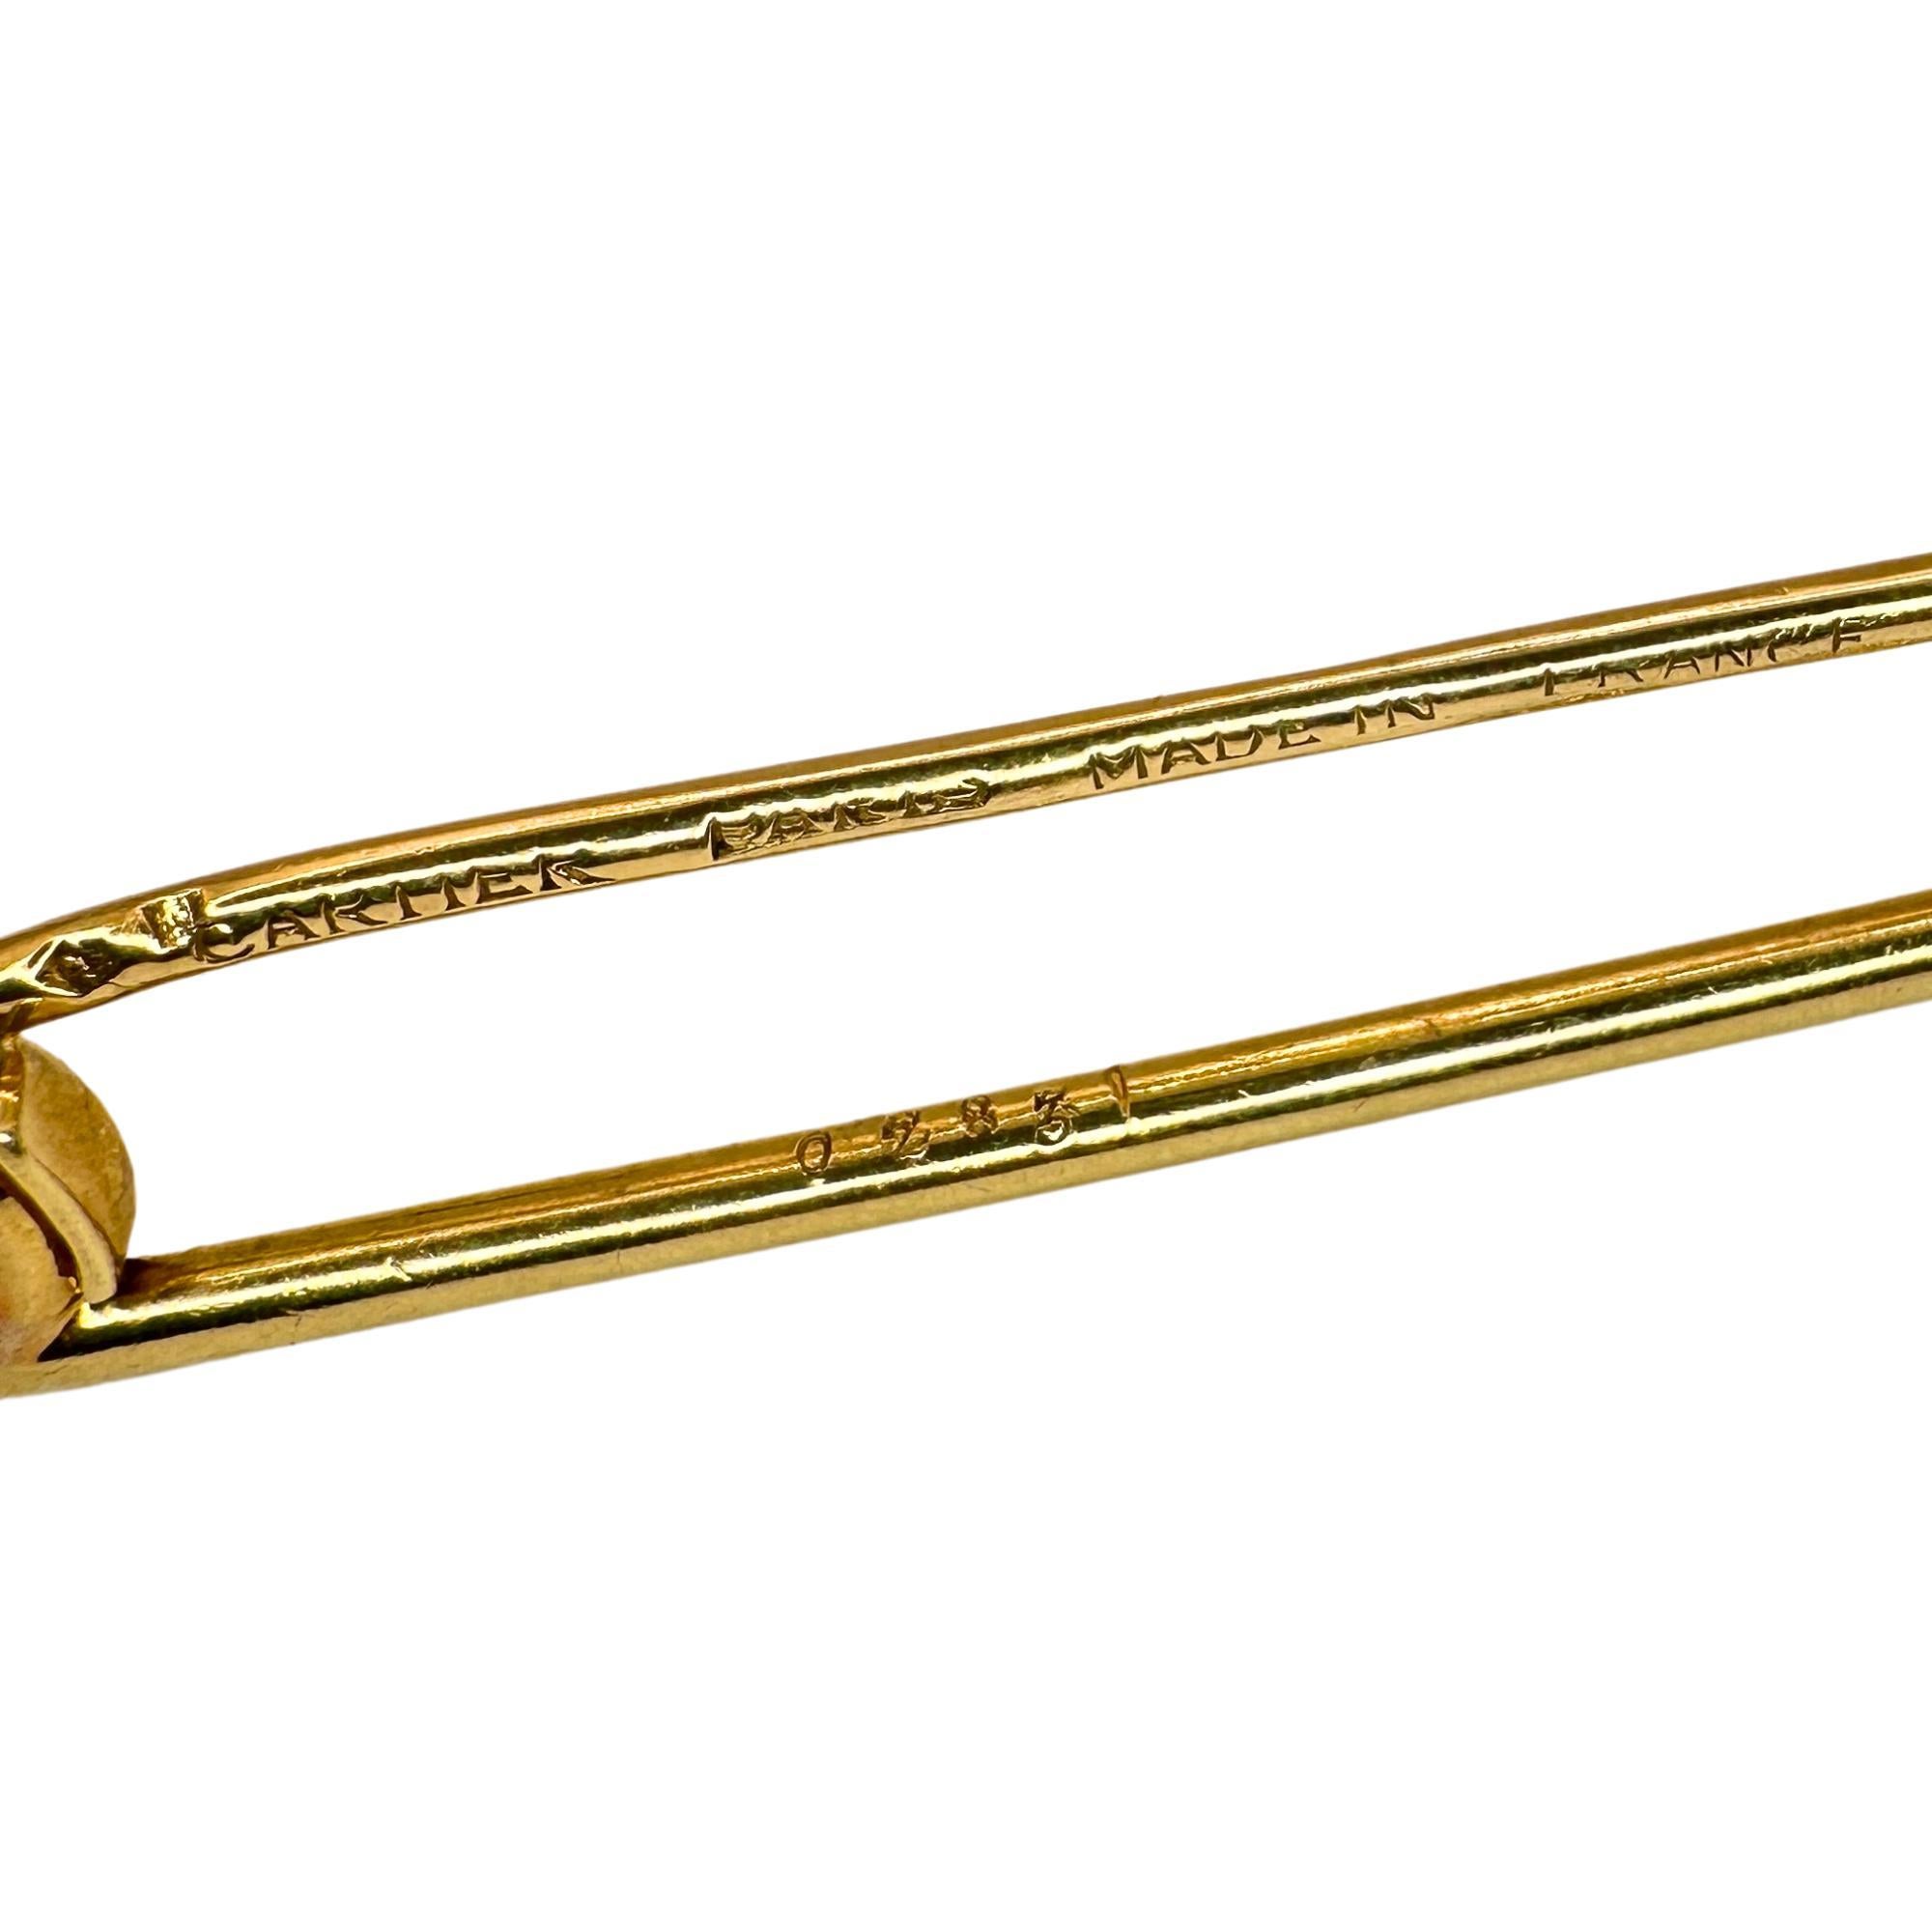 Add a Subtle touch of elegance with this 18k Cartier Paris Safety Pin Brooch. Crafted from high quality 18k yellow gold, this brooch exudes luxury and sophistication. In good condition with minor surface wear, this vintage piece is a must-have for